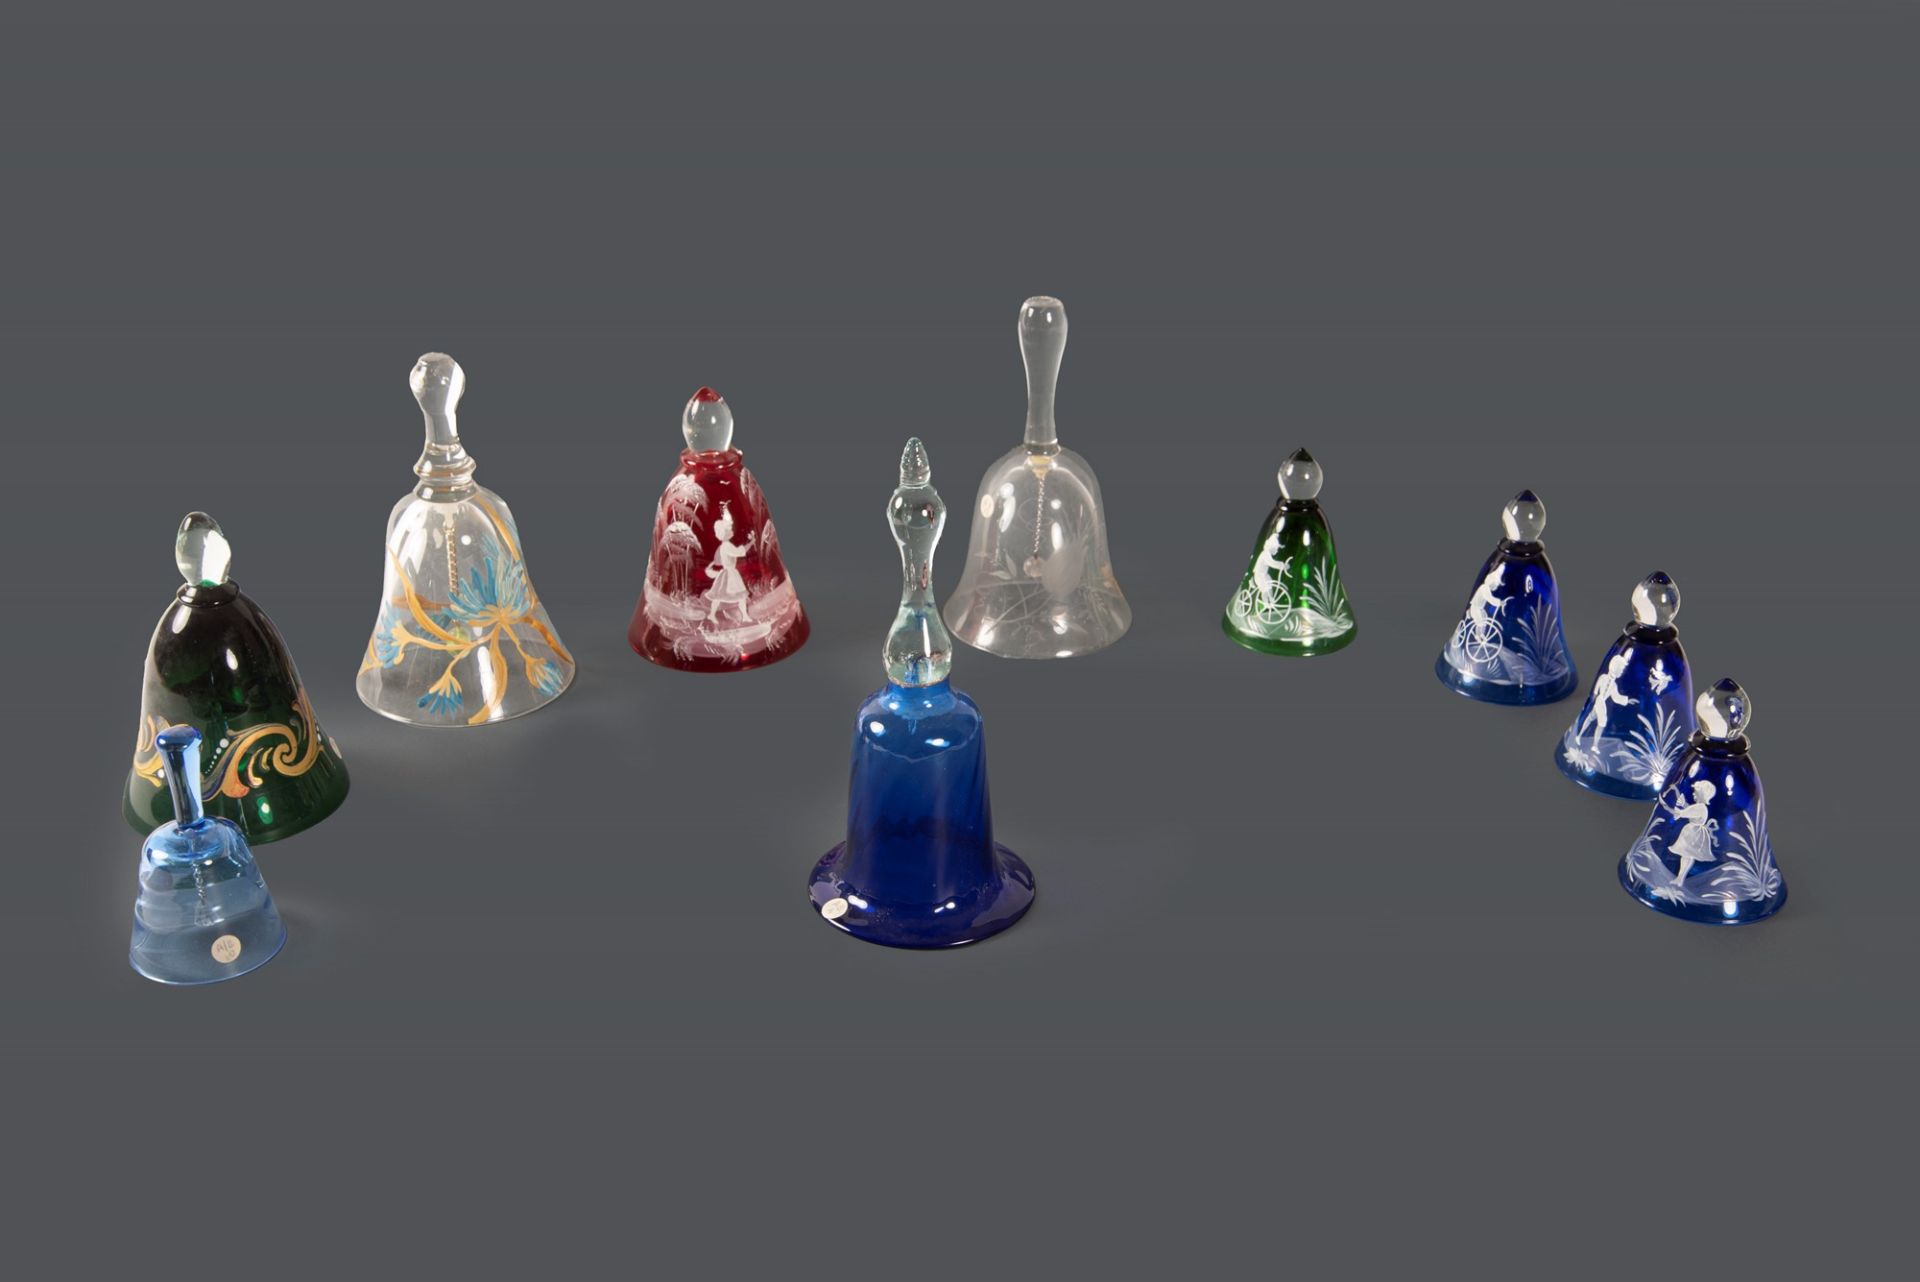 Lot consisting of ten Murano glass bells, 20th century - Image 2 of 2